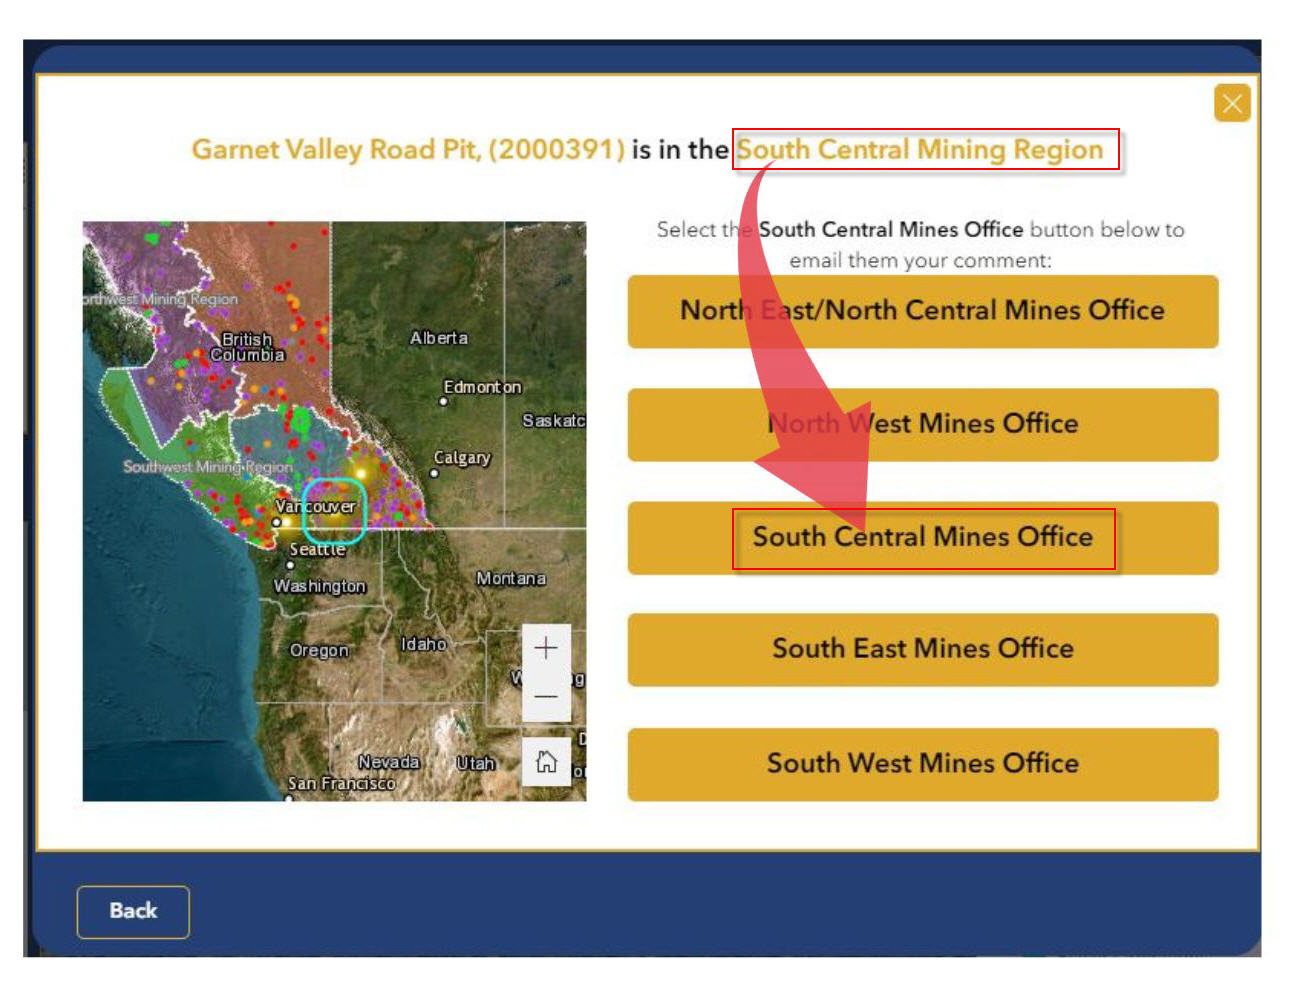 Image of the submit comment pop-up to illustrate the Mining region description and button for the corresponding office. 